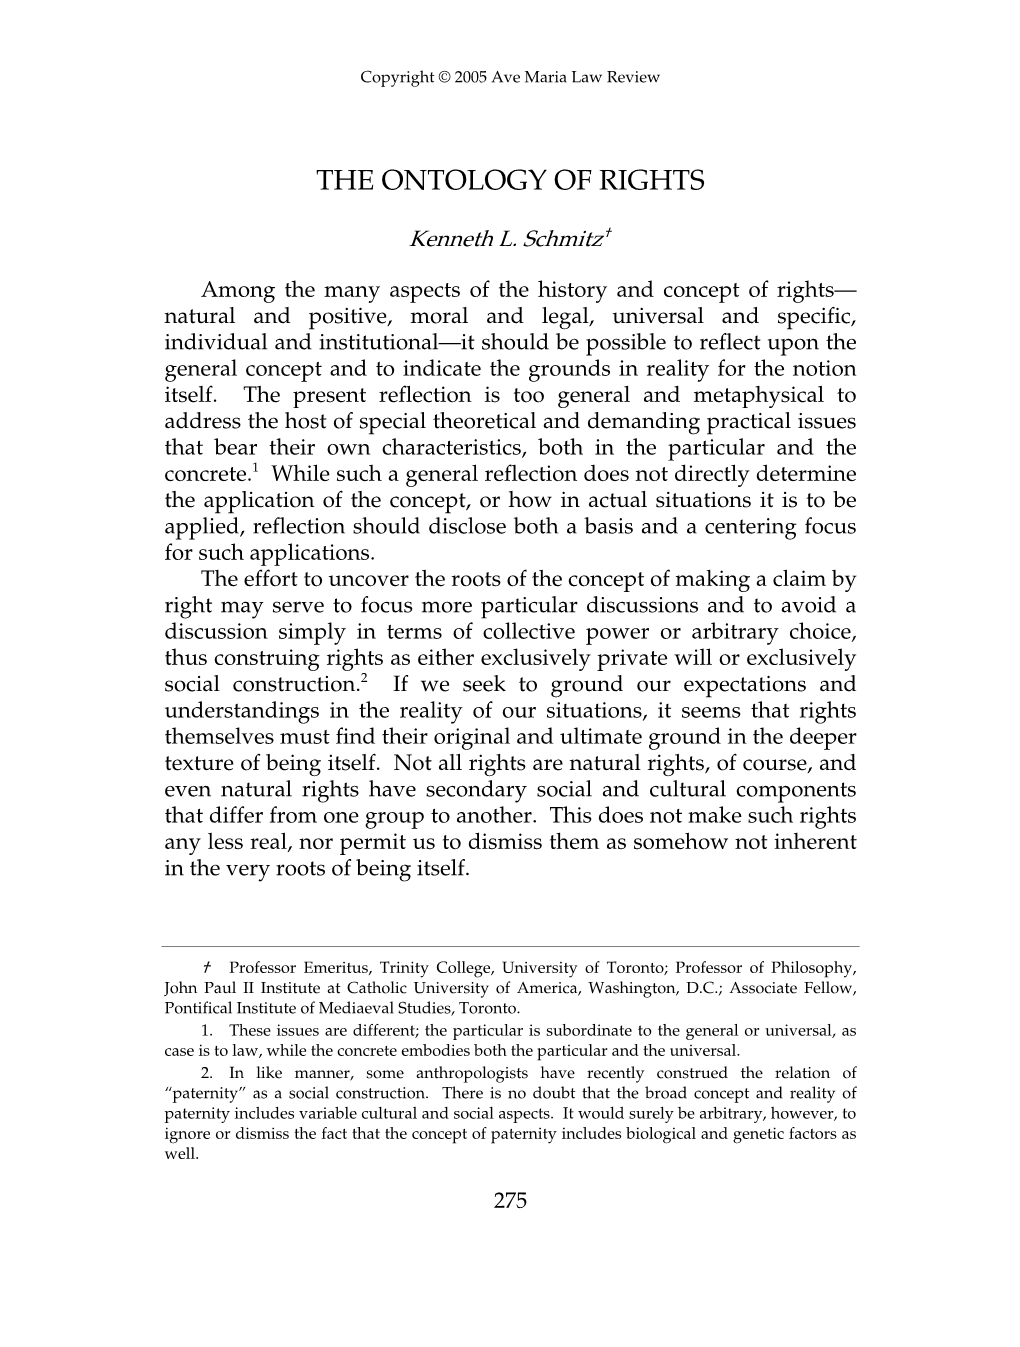 The Ontology of Rights